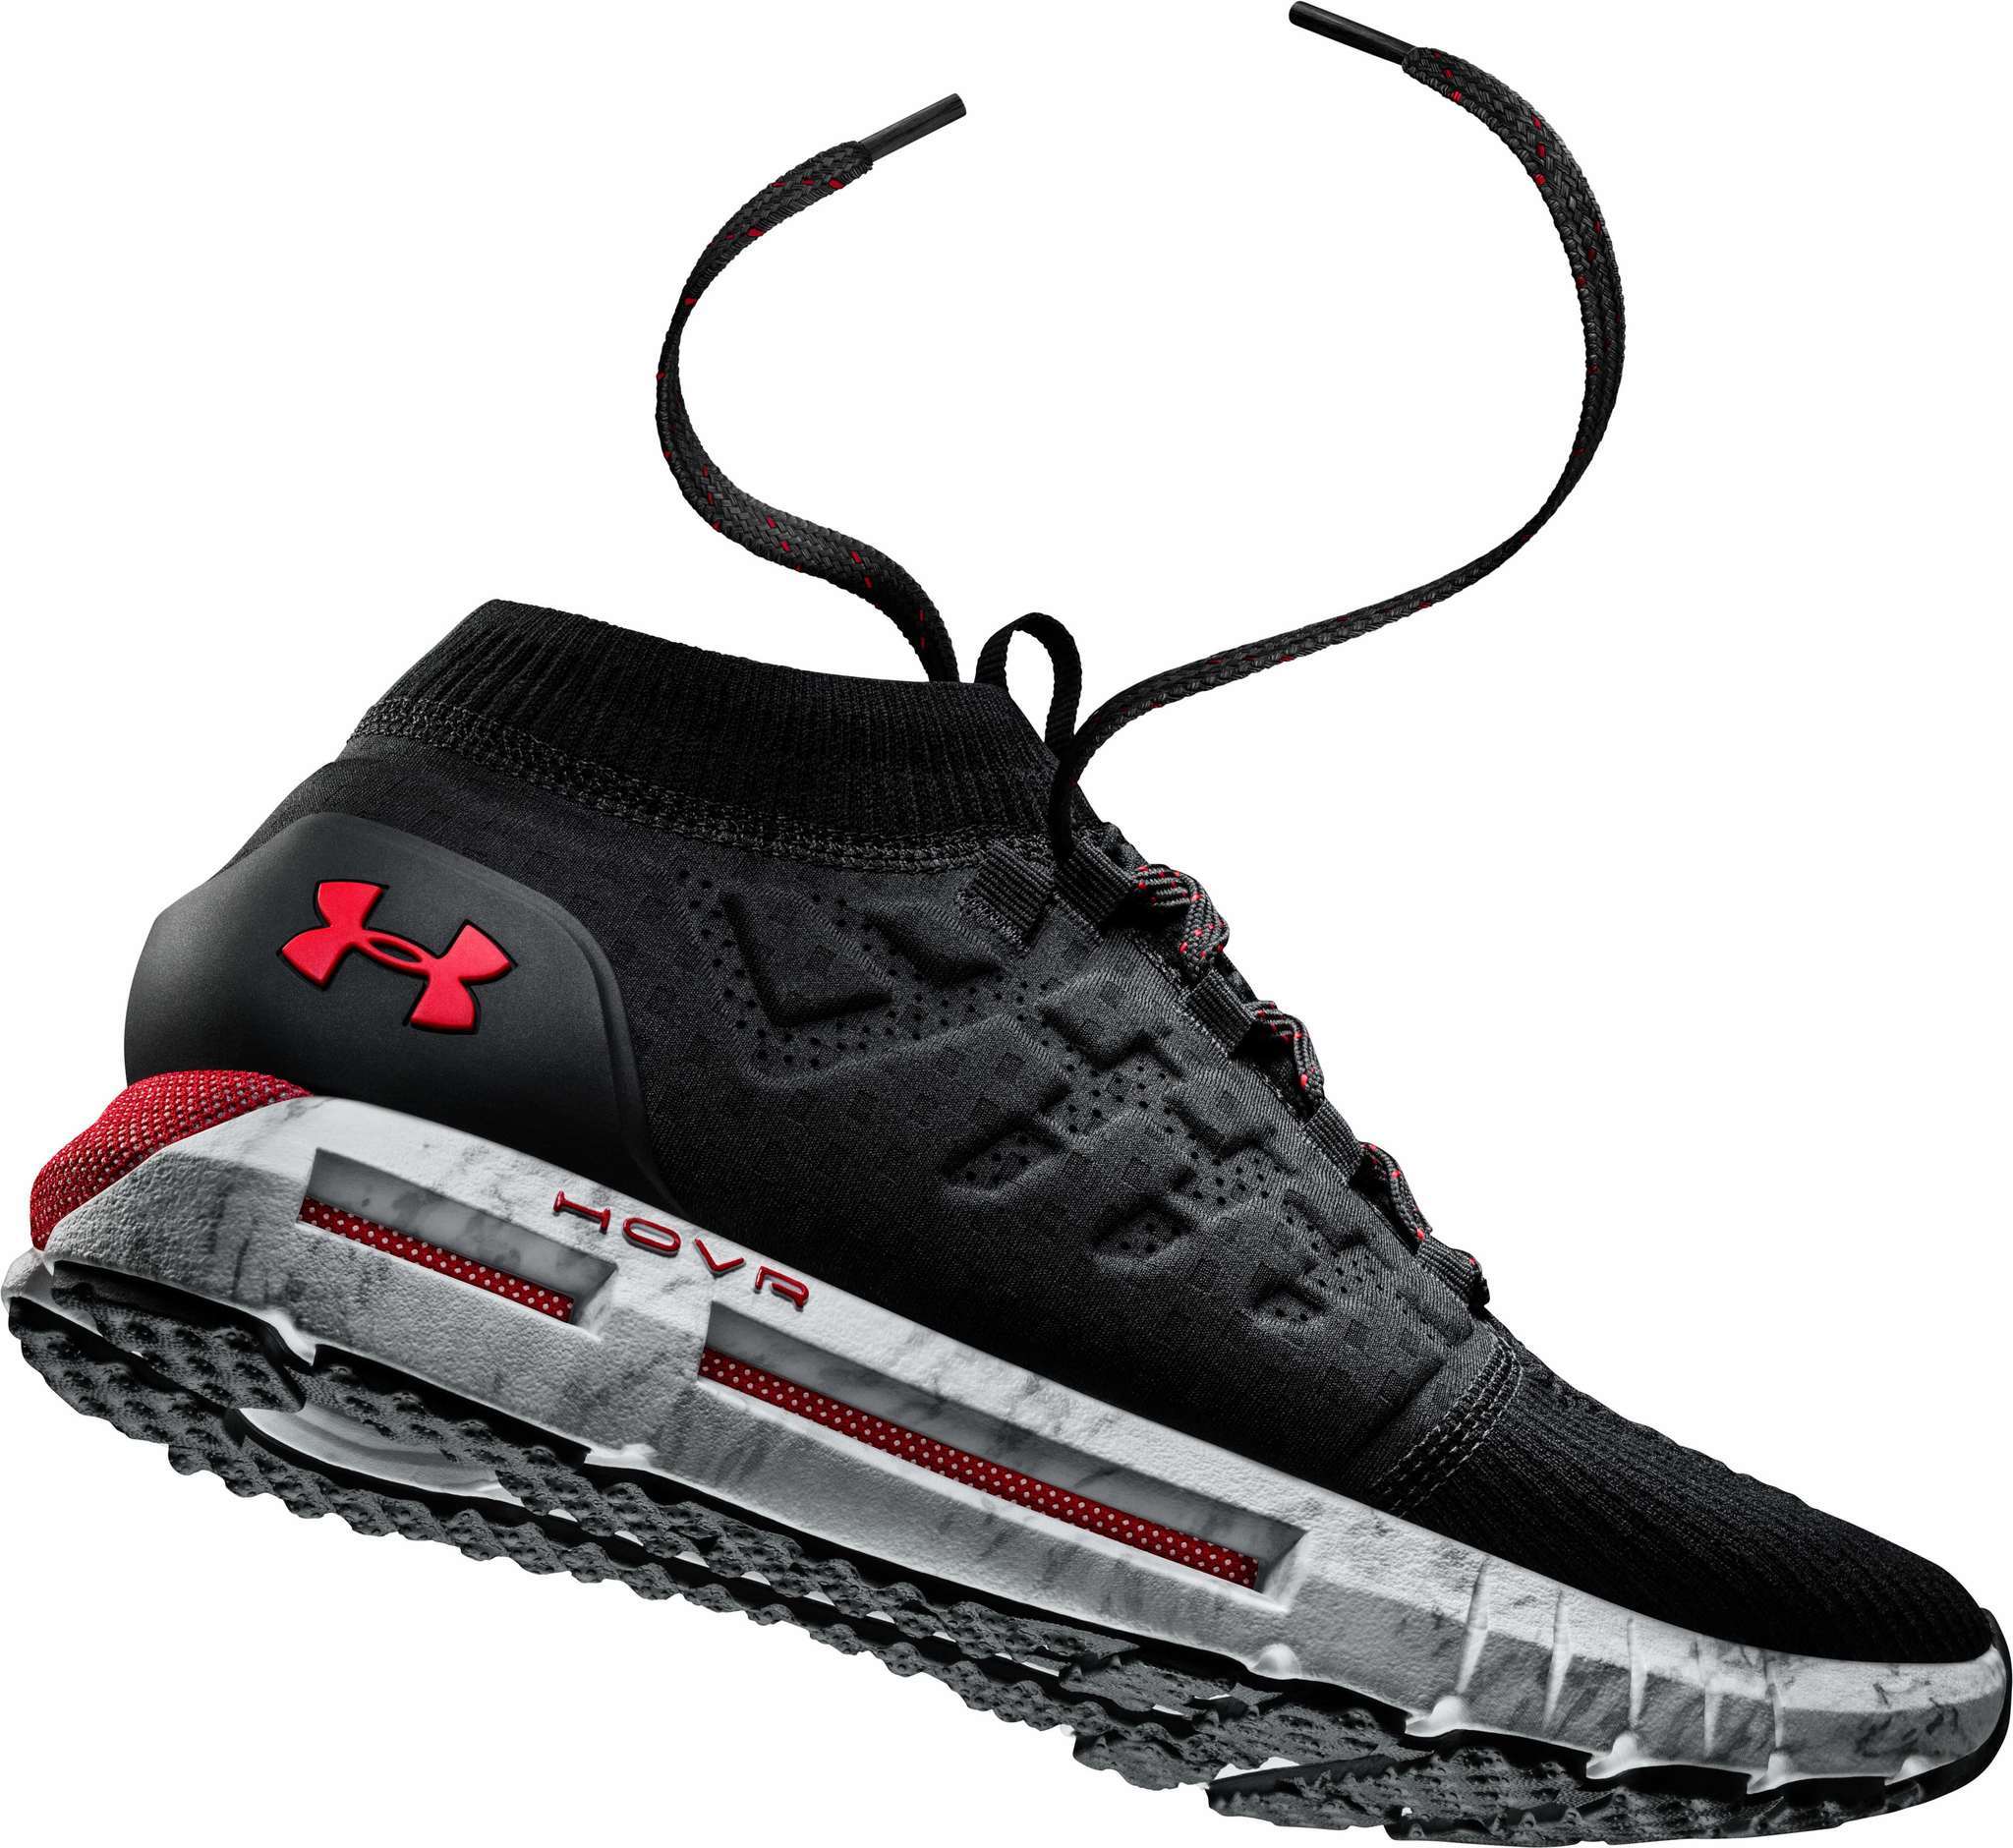 UnderArmour Charged-up smart running shoe.